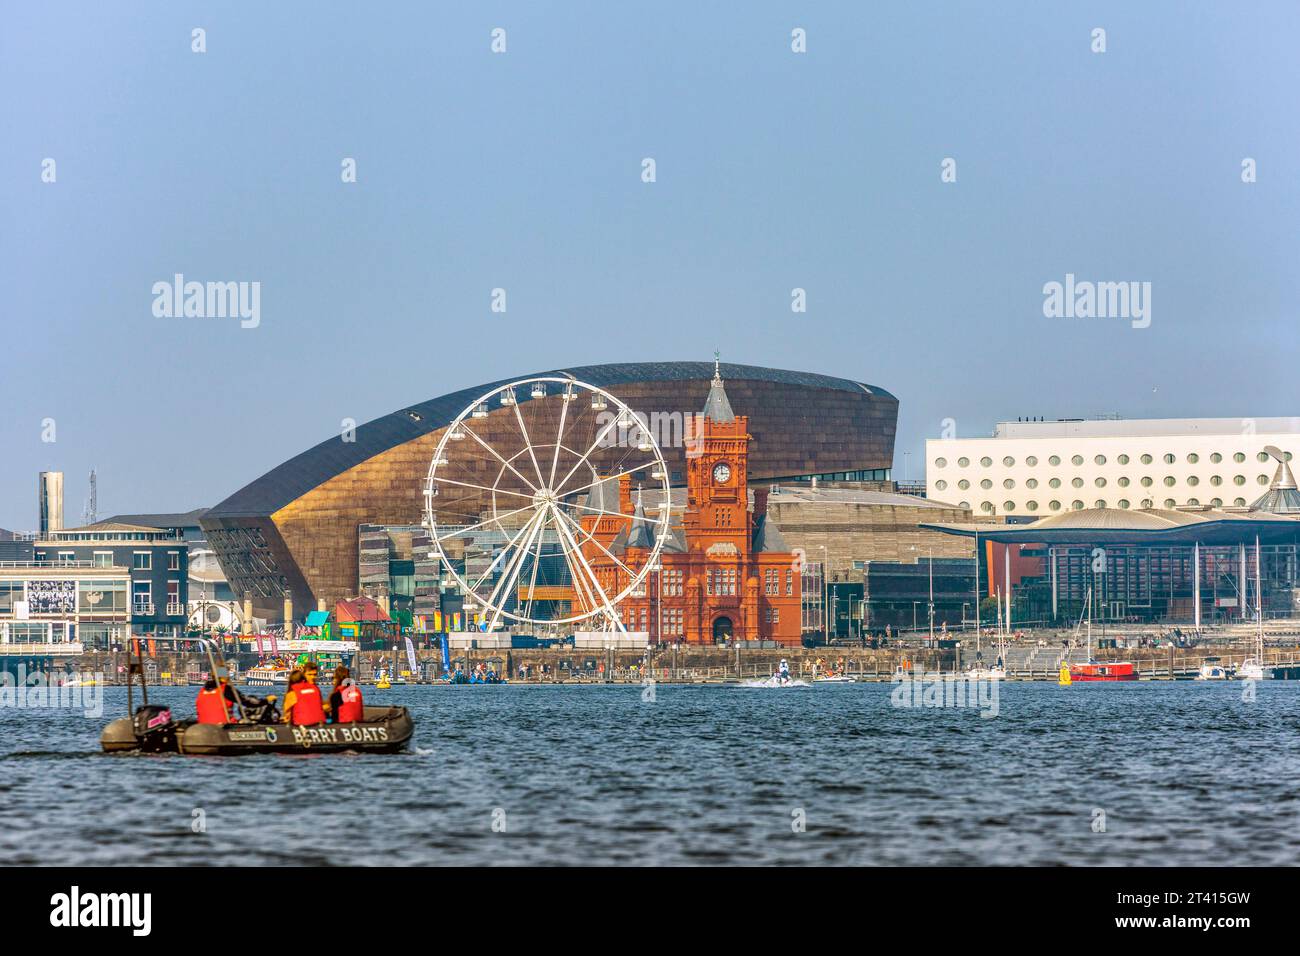 Cardiff Bay, including the Cardfiff Eye, Wales Millennium Centre, the Pierhead Building and the Senedd, South Wales Stock Photo